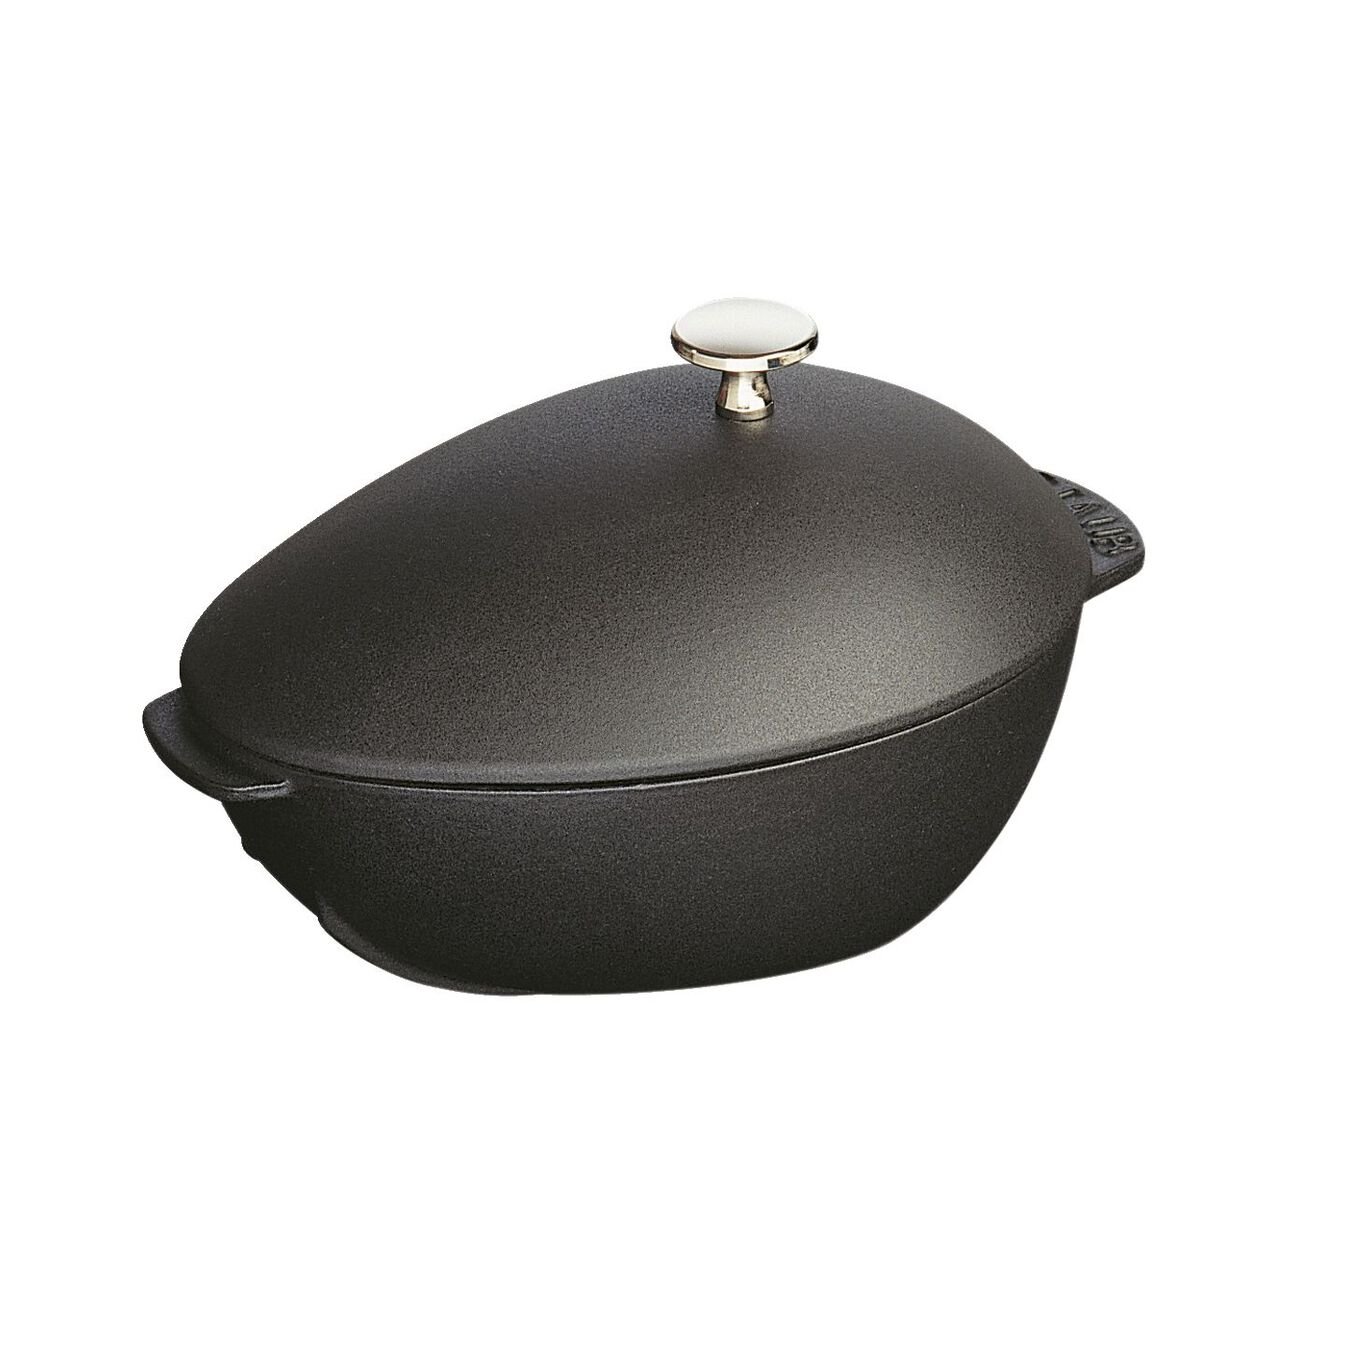 2 l cast iron oval Mussel pot, black - Visual Imperfections,,large 2